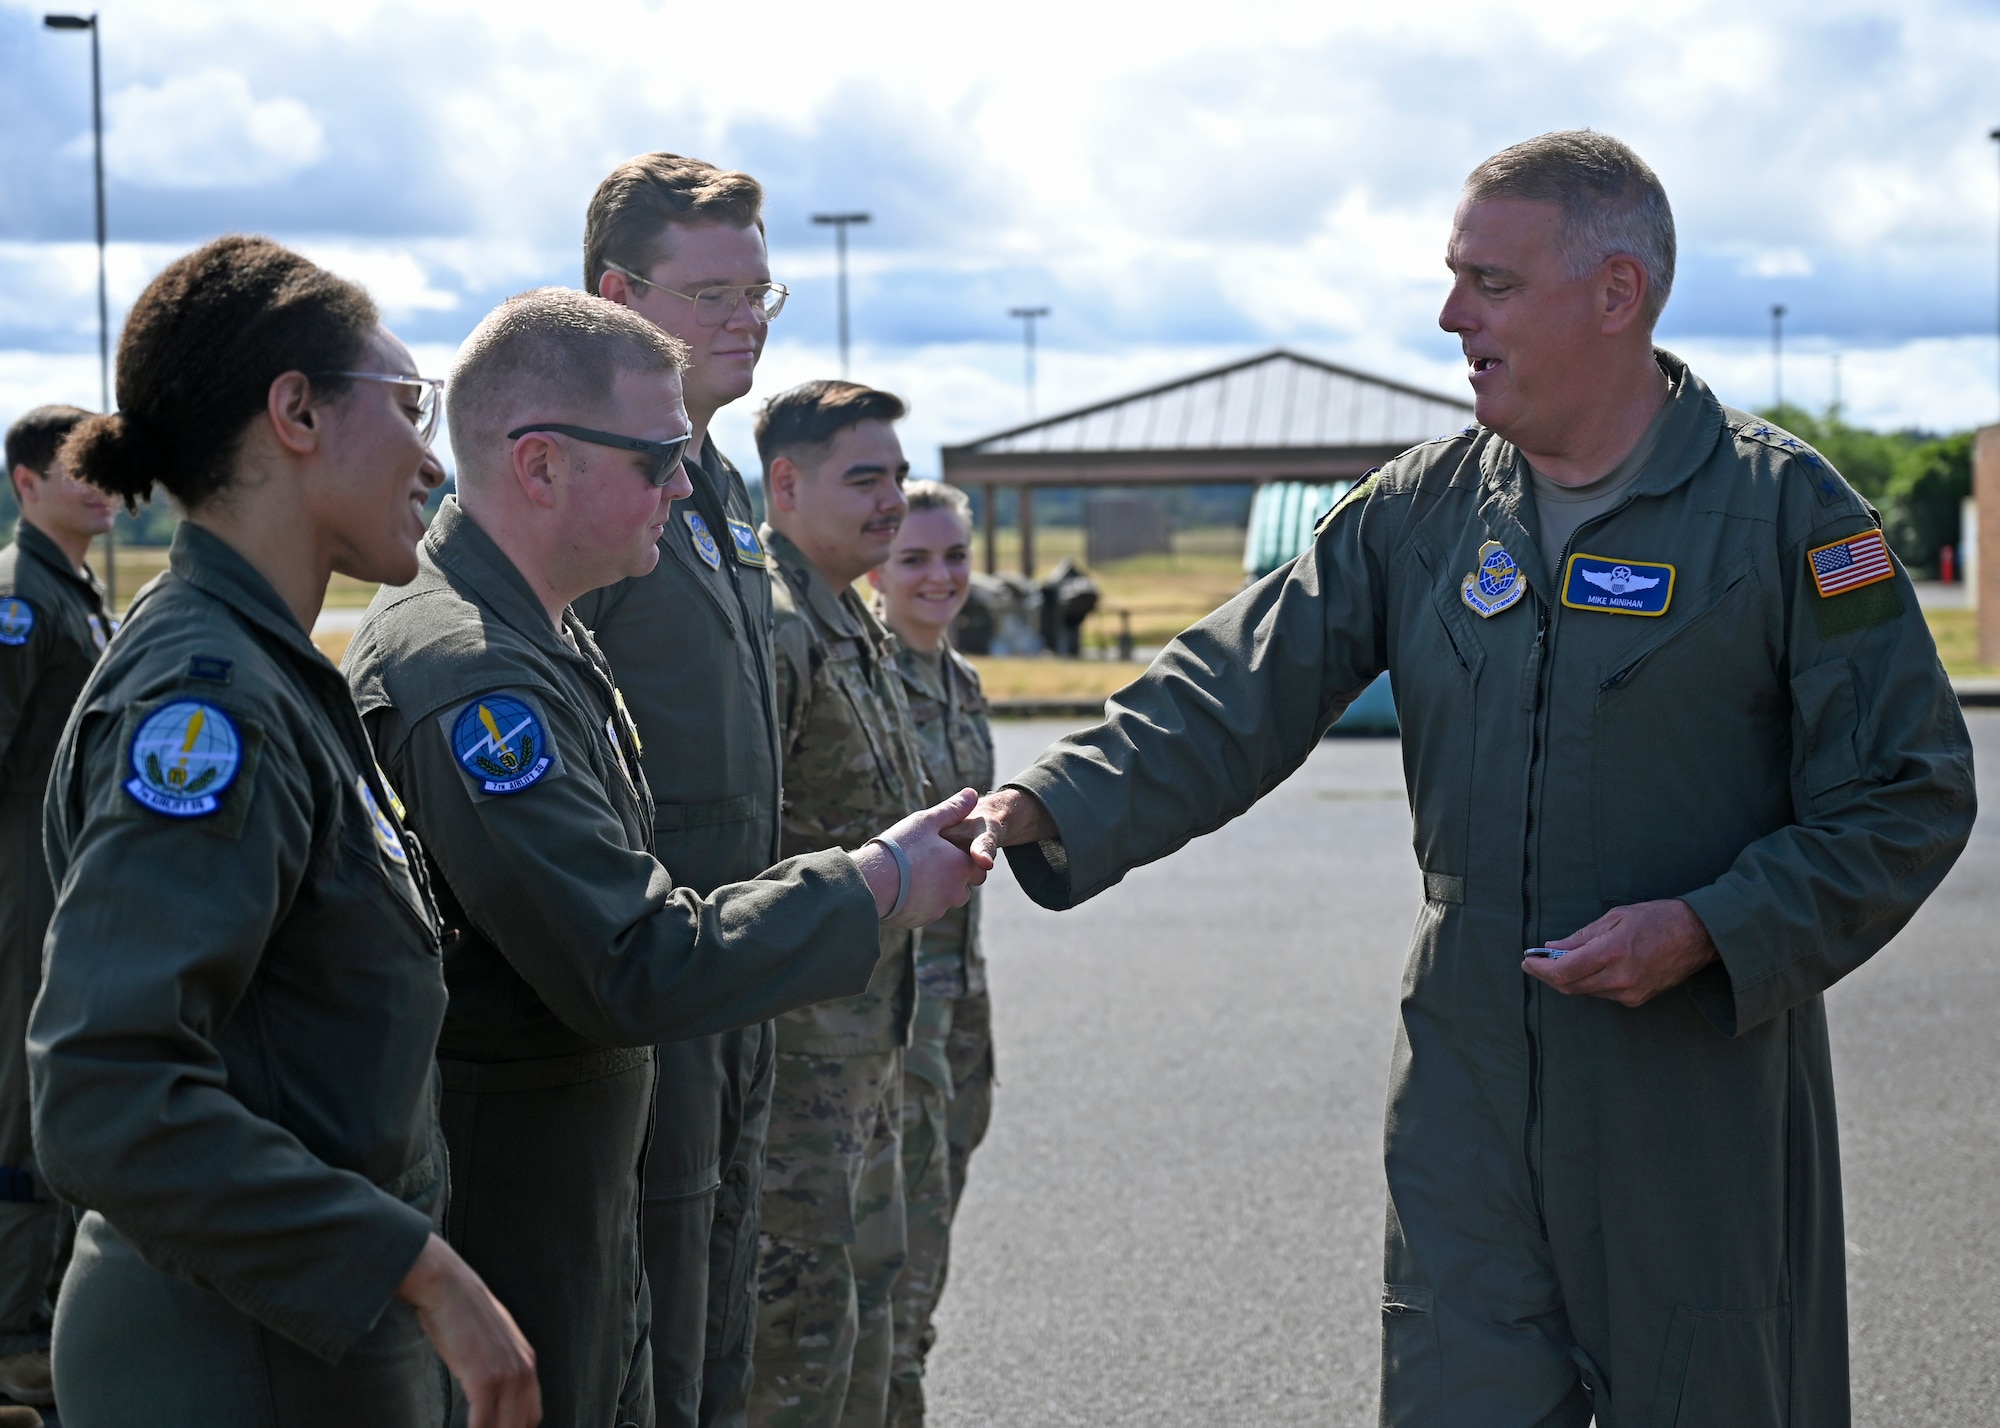 U.S. Air Force Gen. Mike Minihan, Air Mobility Command commander, coins the 2021 AMC Doolittle Award winners during his visit to Joint Base Lewis-McChord, Washington, July 7, 2022. The crew of RCH683 was recognized for their participation in Operation ALLIES REFUGE, which enabled thousands of Afghani’s evacuation from Kabul, Afghanistan, in August 2021. (U.S. Air Force photo by Senior Airman Callie Norton)